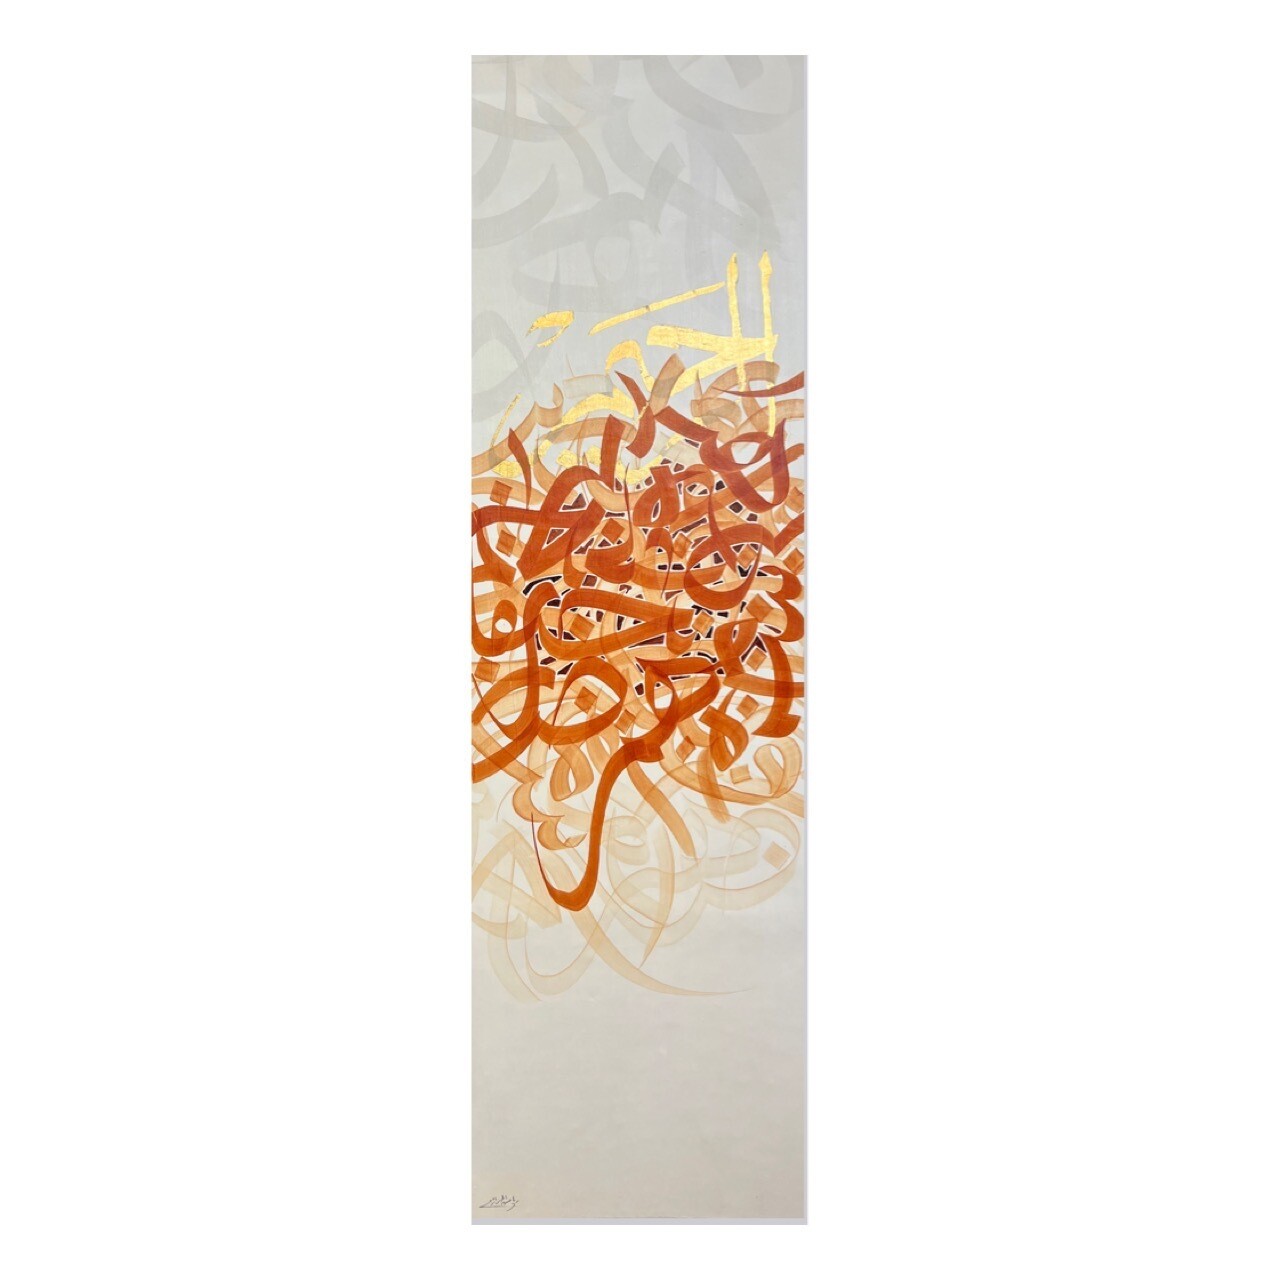 Ar-Rahim - Names of Allah - Orange & Gold Abstract Calligraphy oil painting